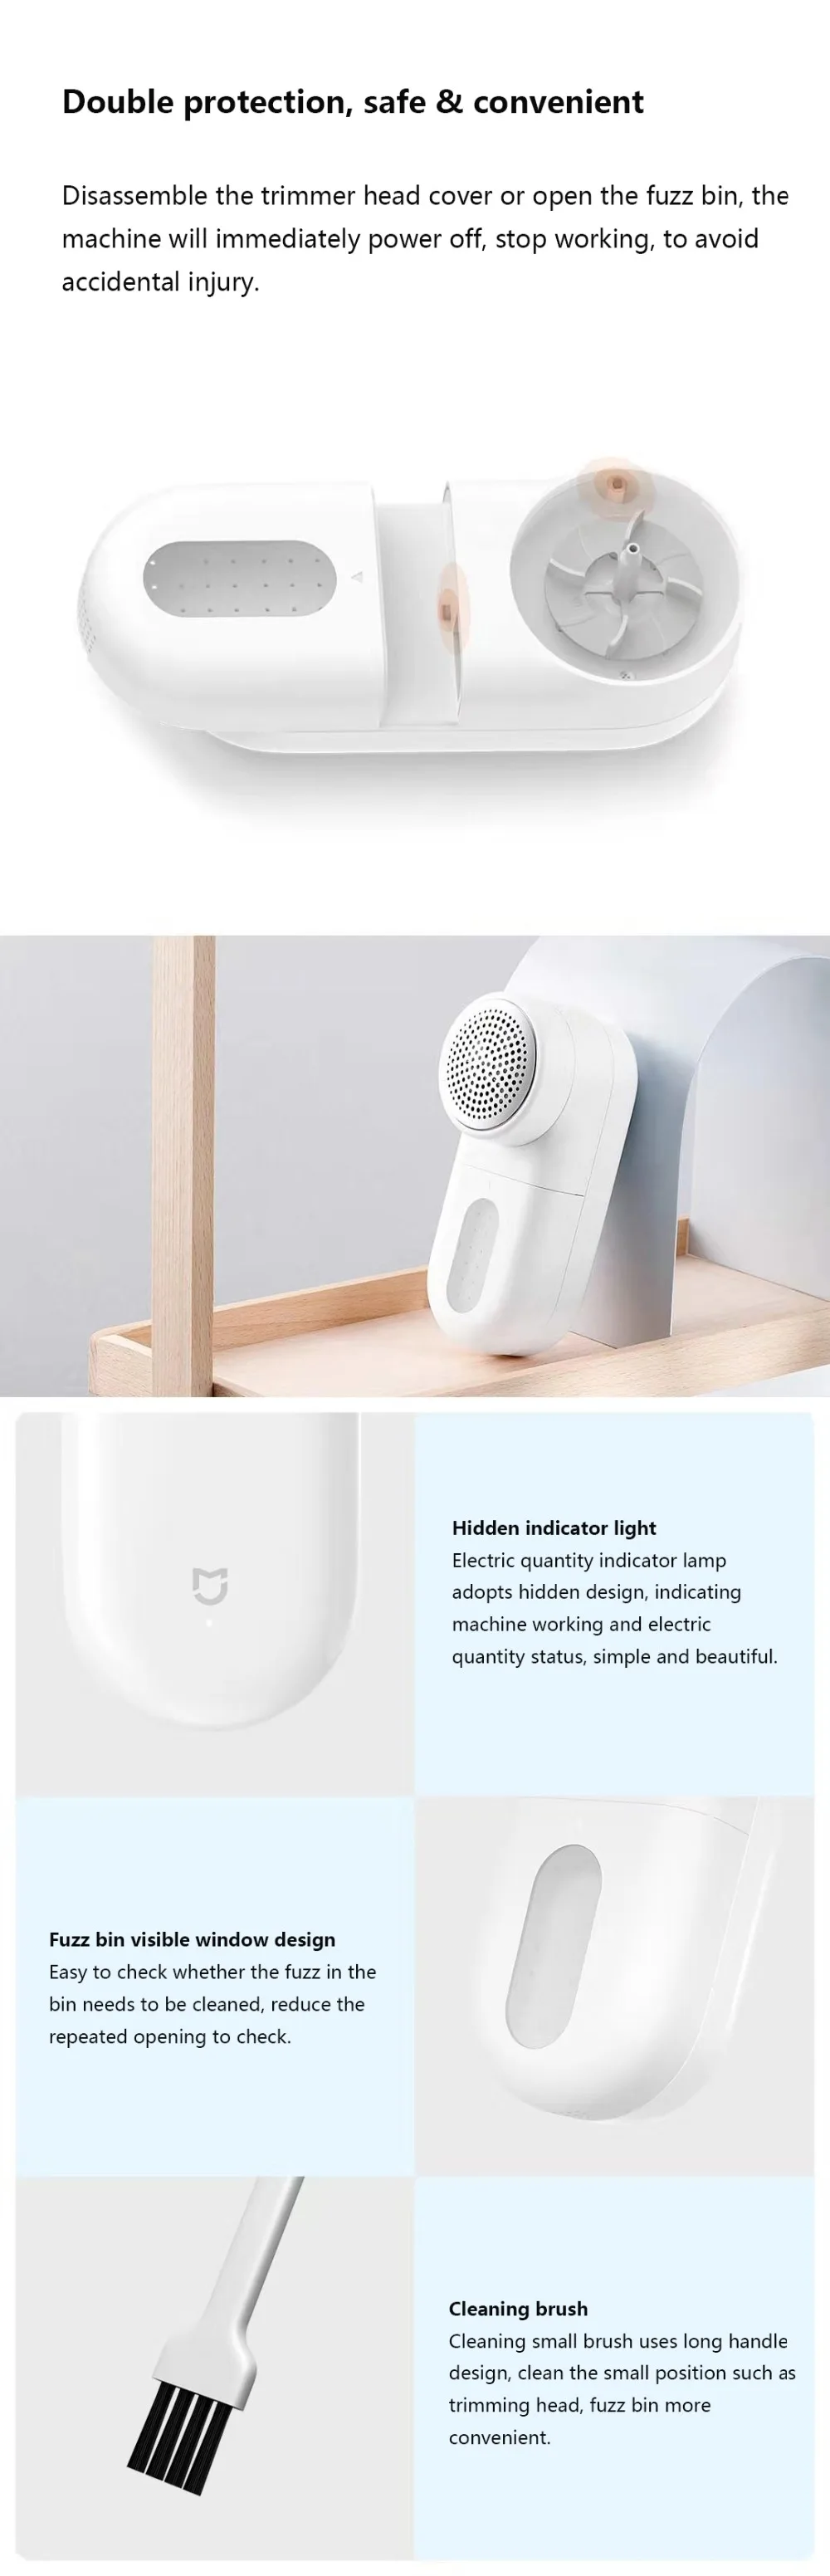 Xiaomi Mijia Mini USB charging Lint Remover 1300mAh Electric Clothes Sweater Fabric Shaver Clean and remove hair balls